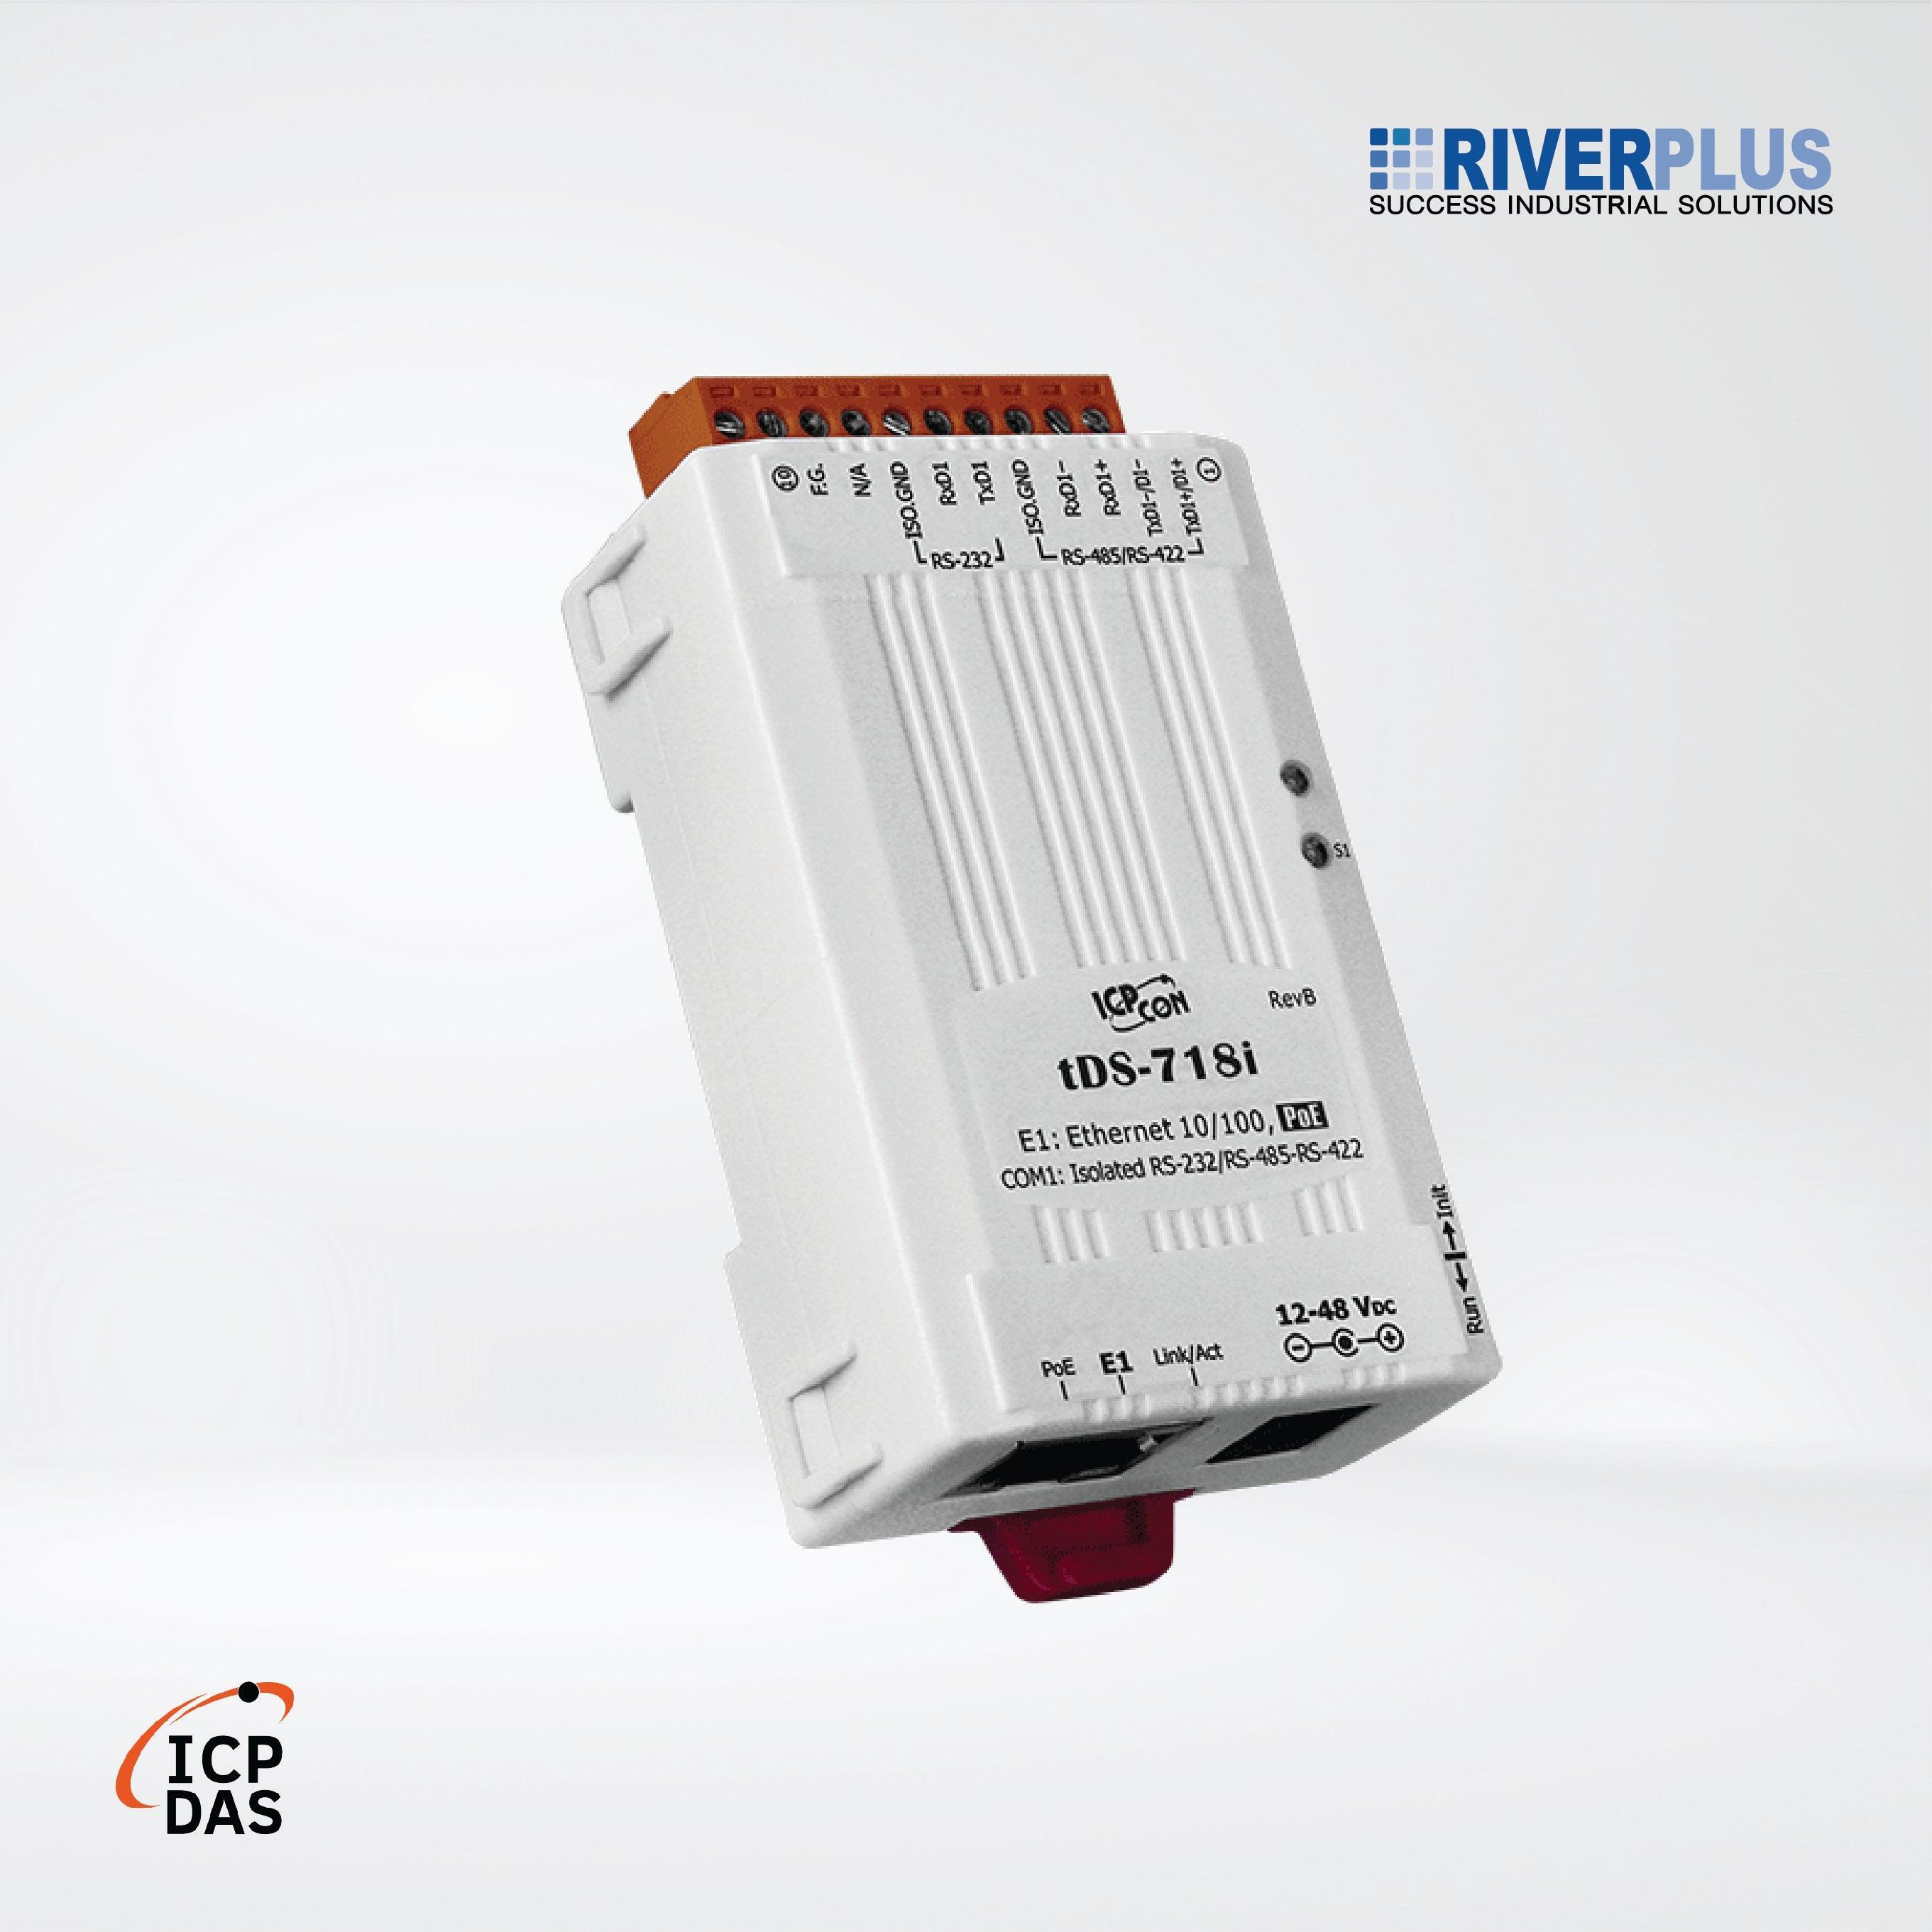 tDS-718i CR Tiny (1x Isolated RS-232/422/485) Serial-to-Ethernet Device Server - Riverplus